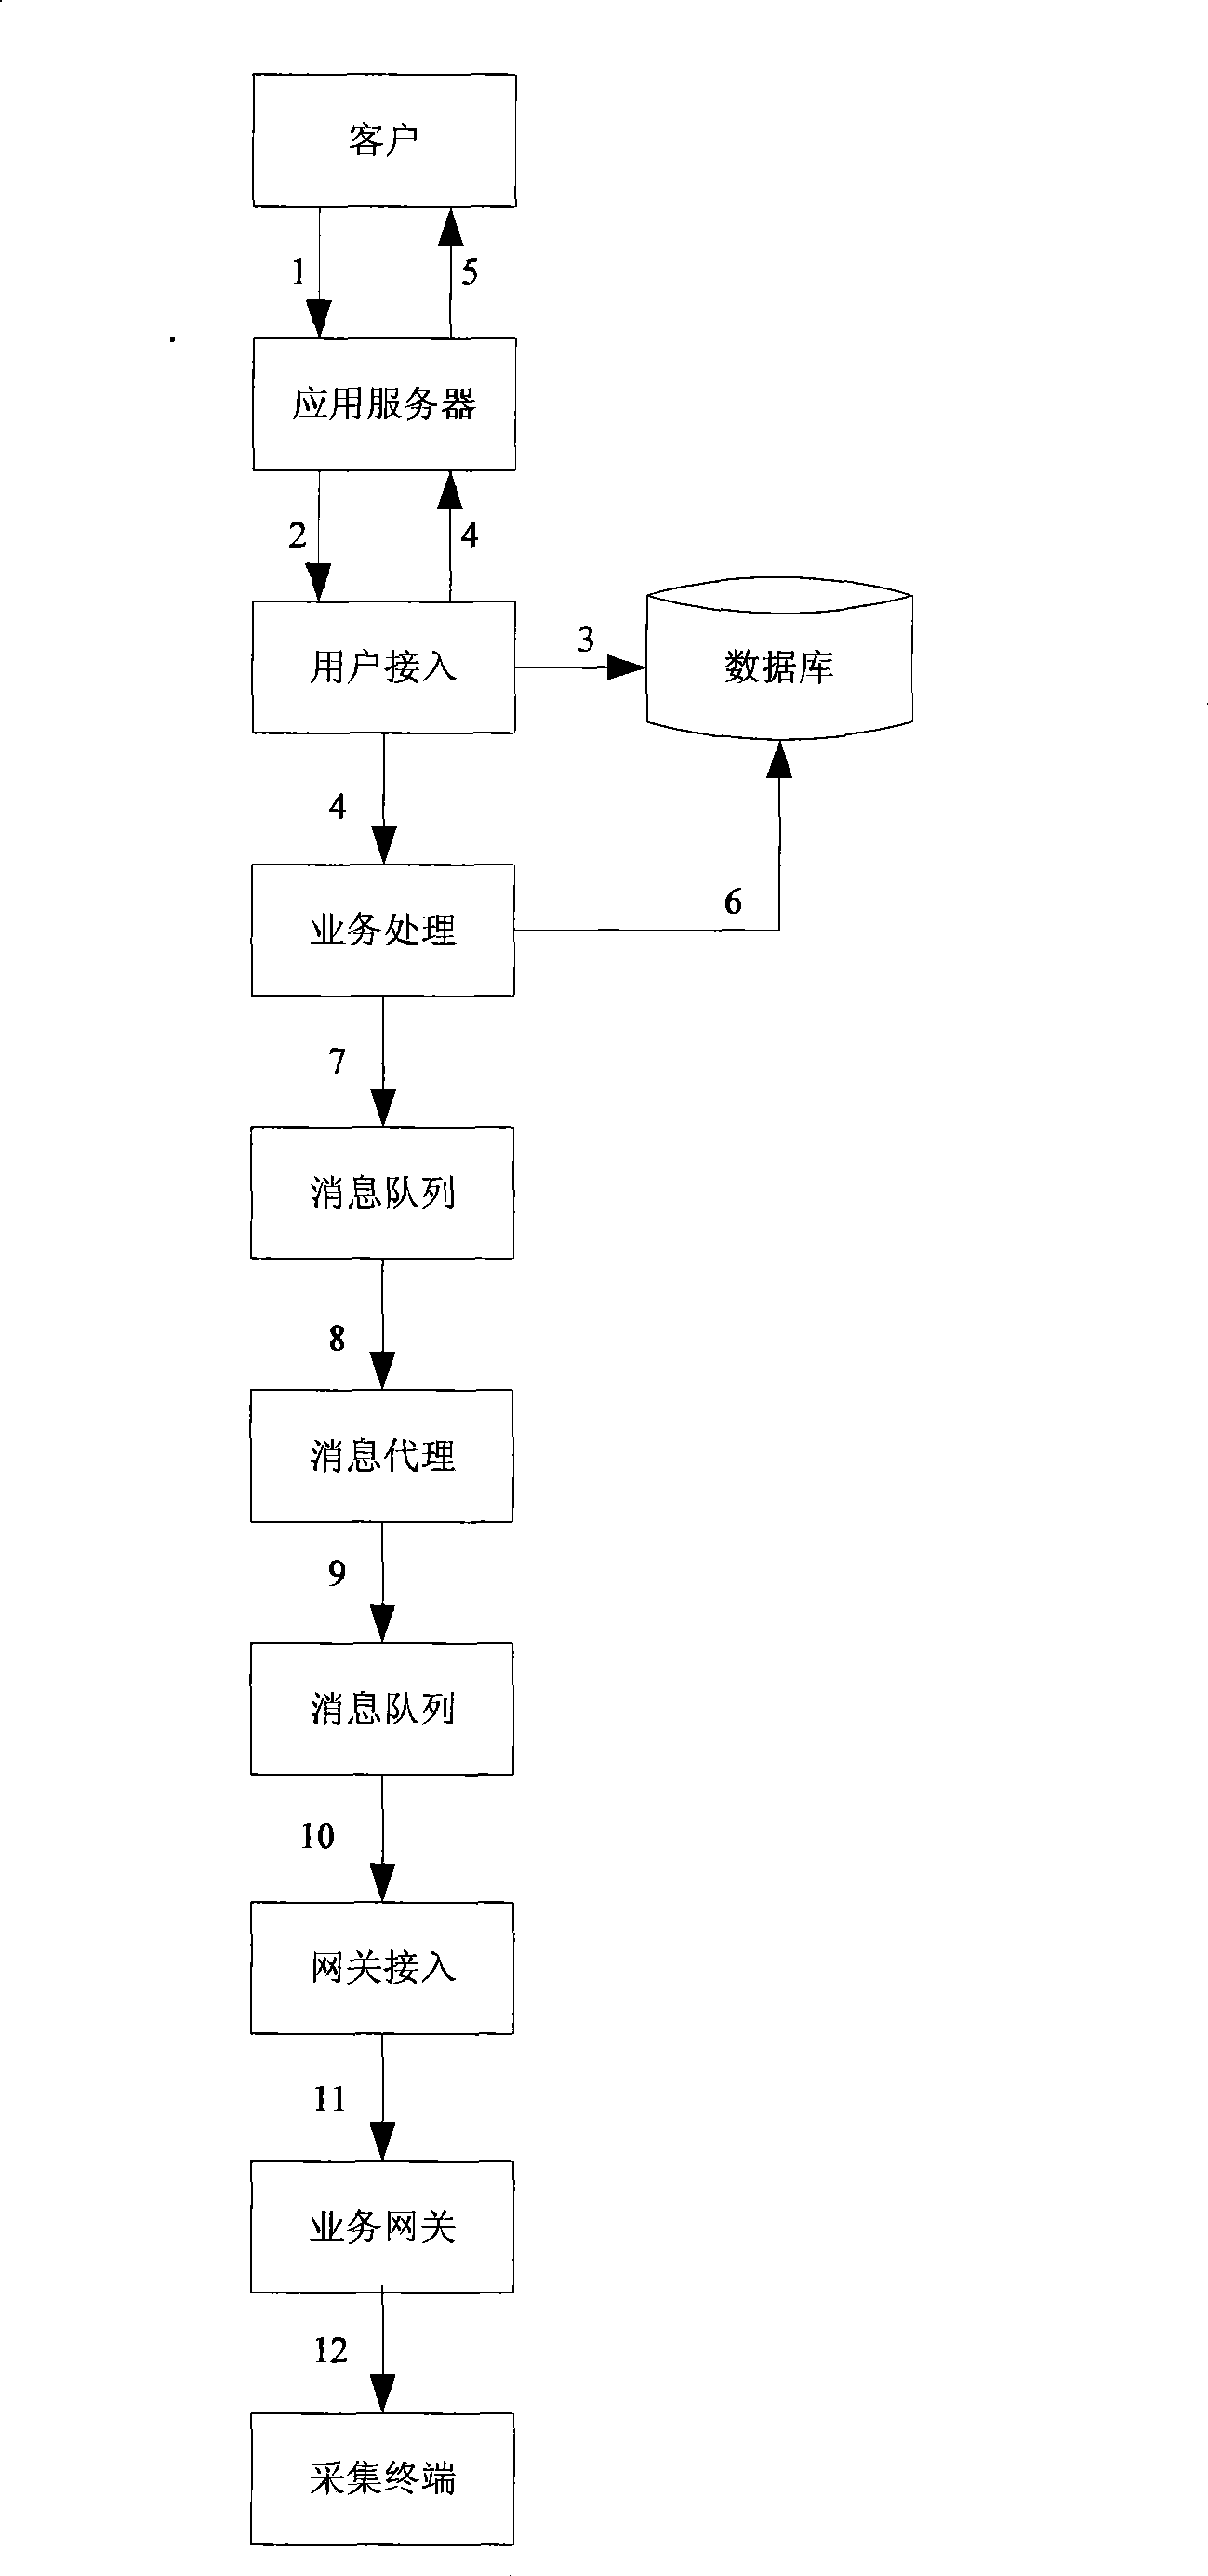 Data processing apparatus and method applied on data collection platform